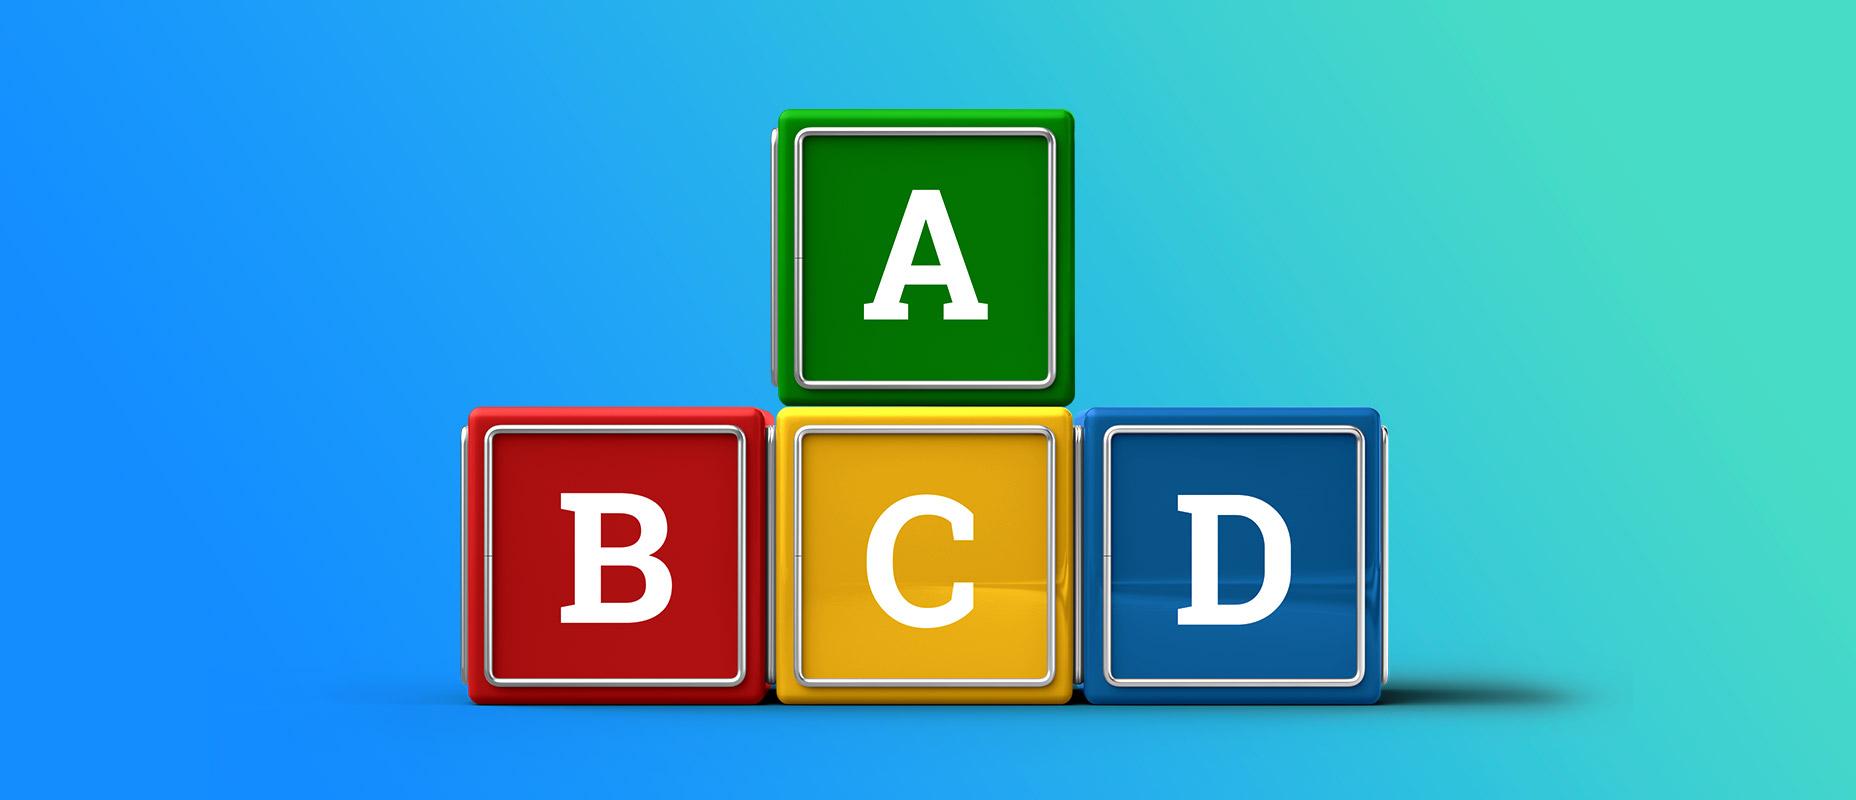 How to Trade With the ABCD Pattern